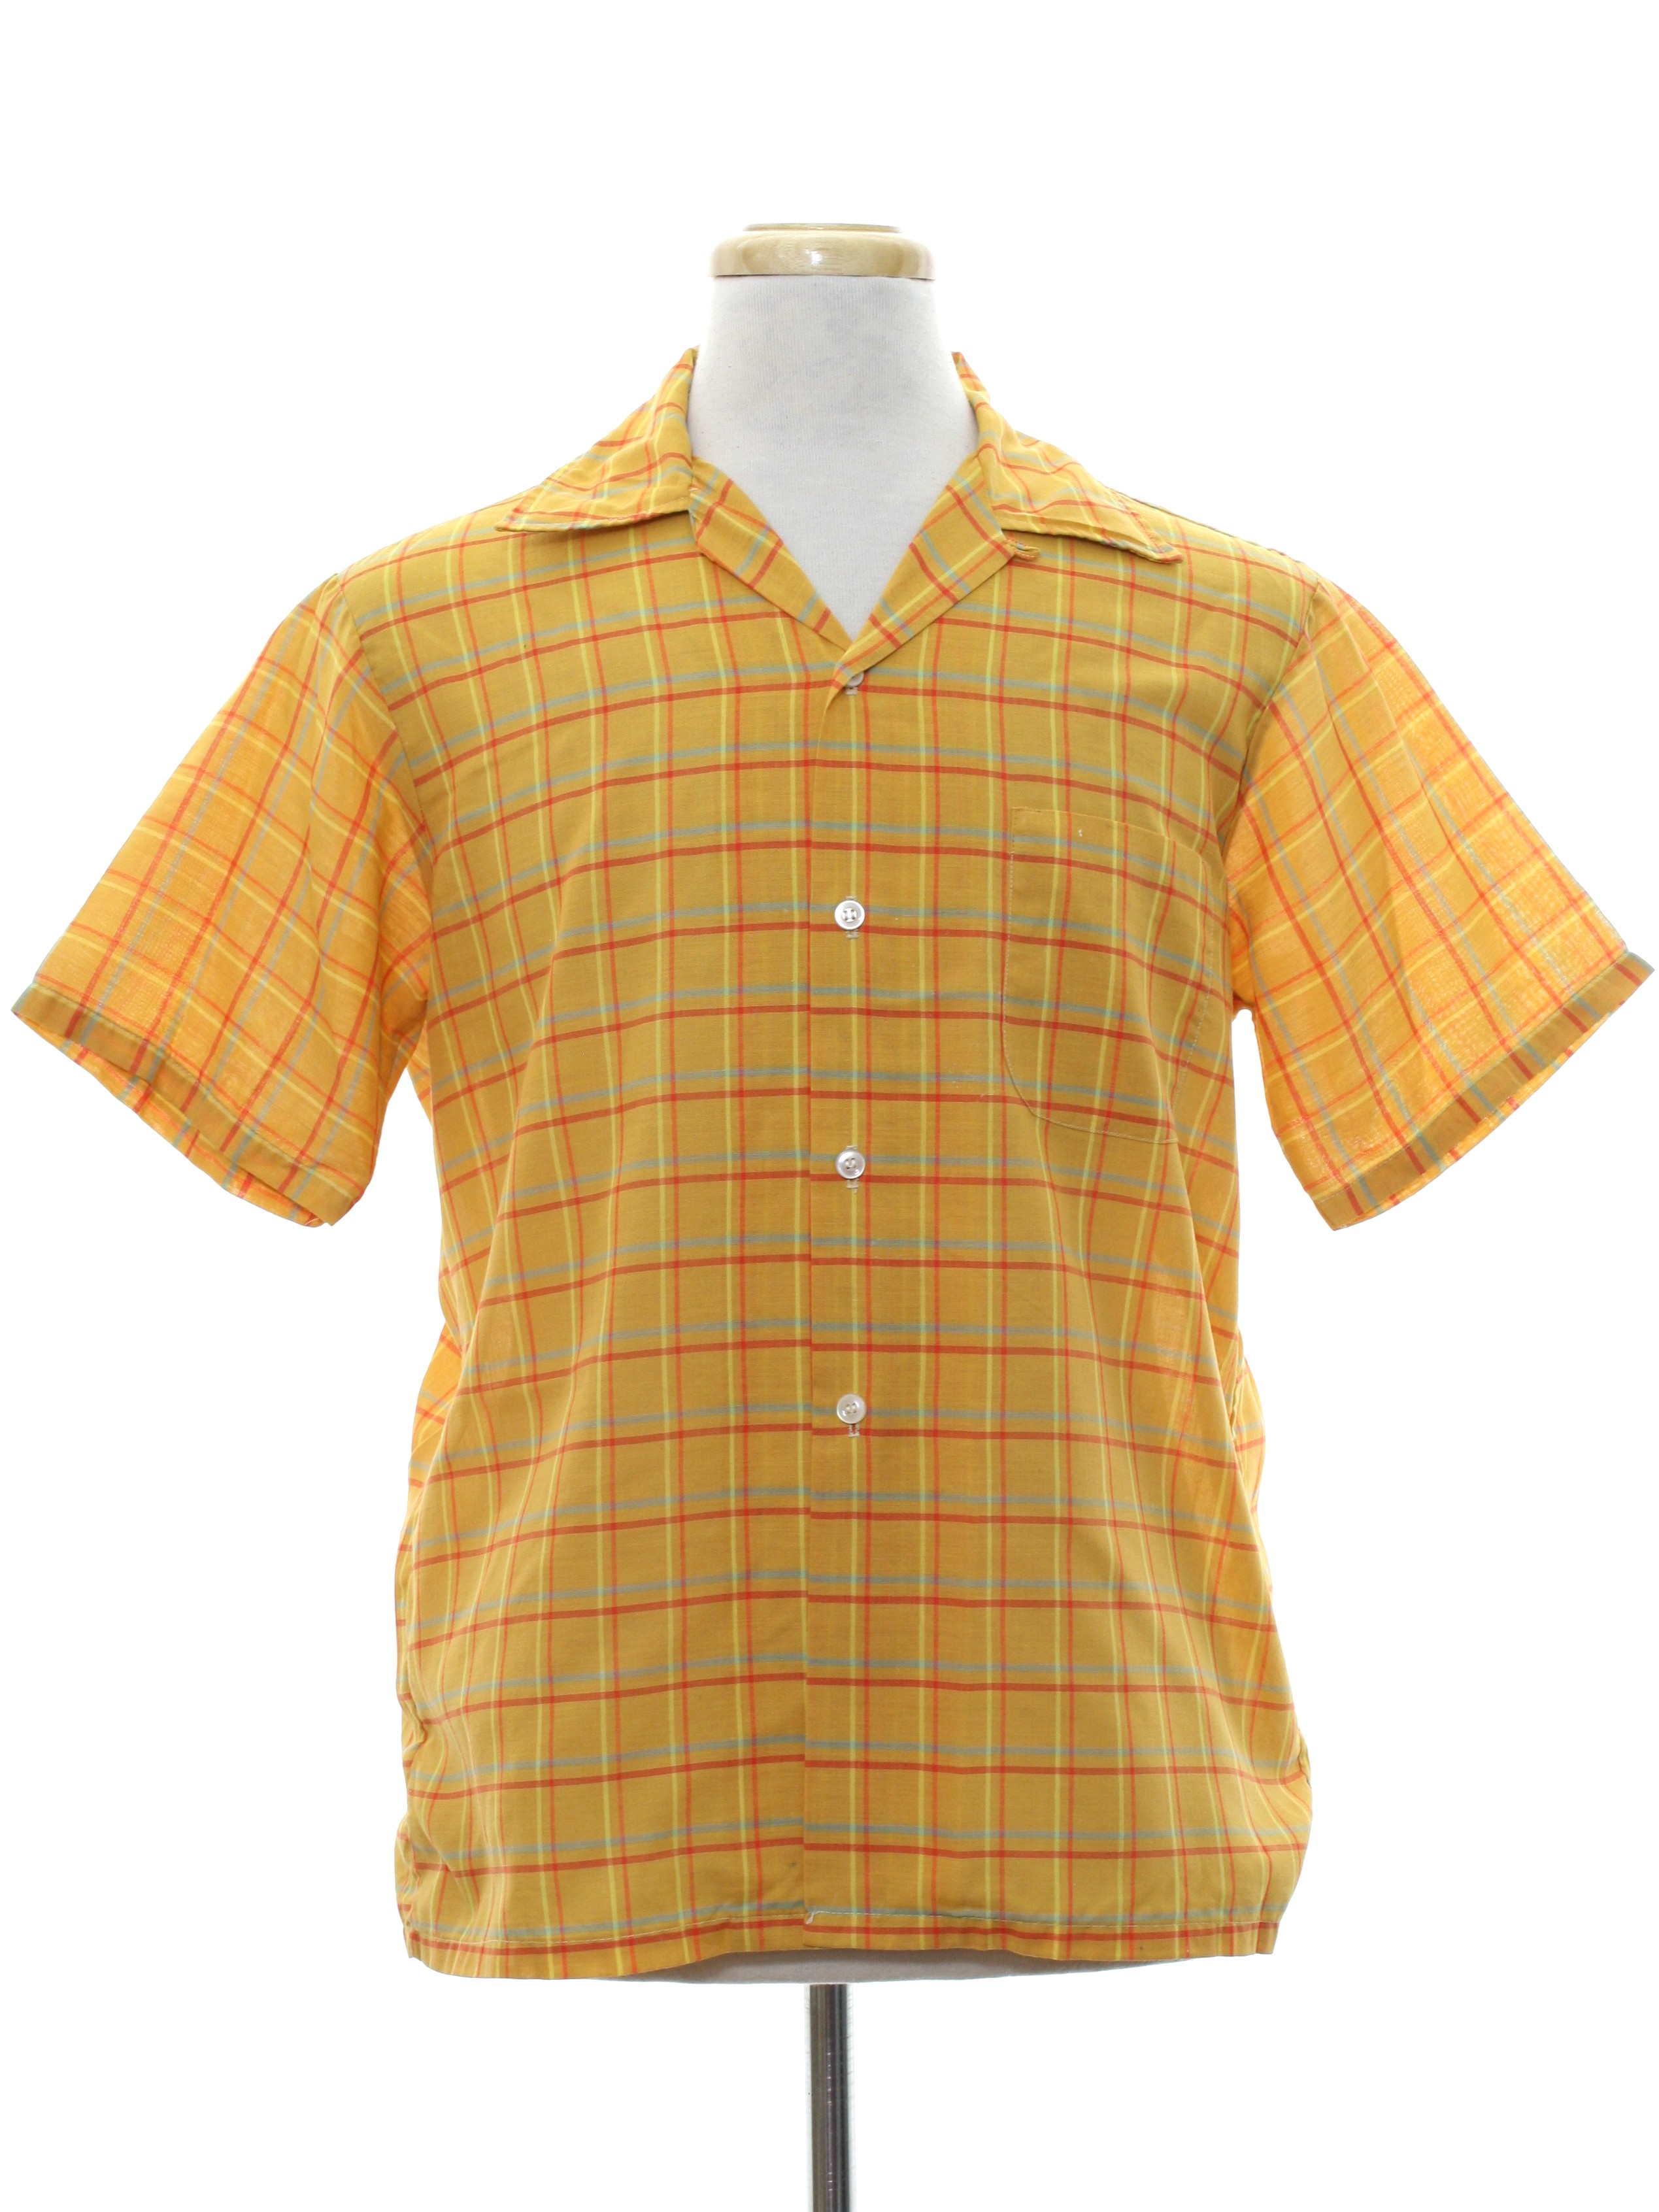 1960s Vintage Shirt: 60s -Sears Perma Prest- Mens gold background ...